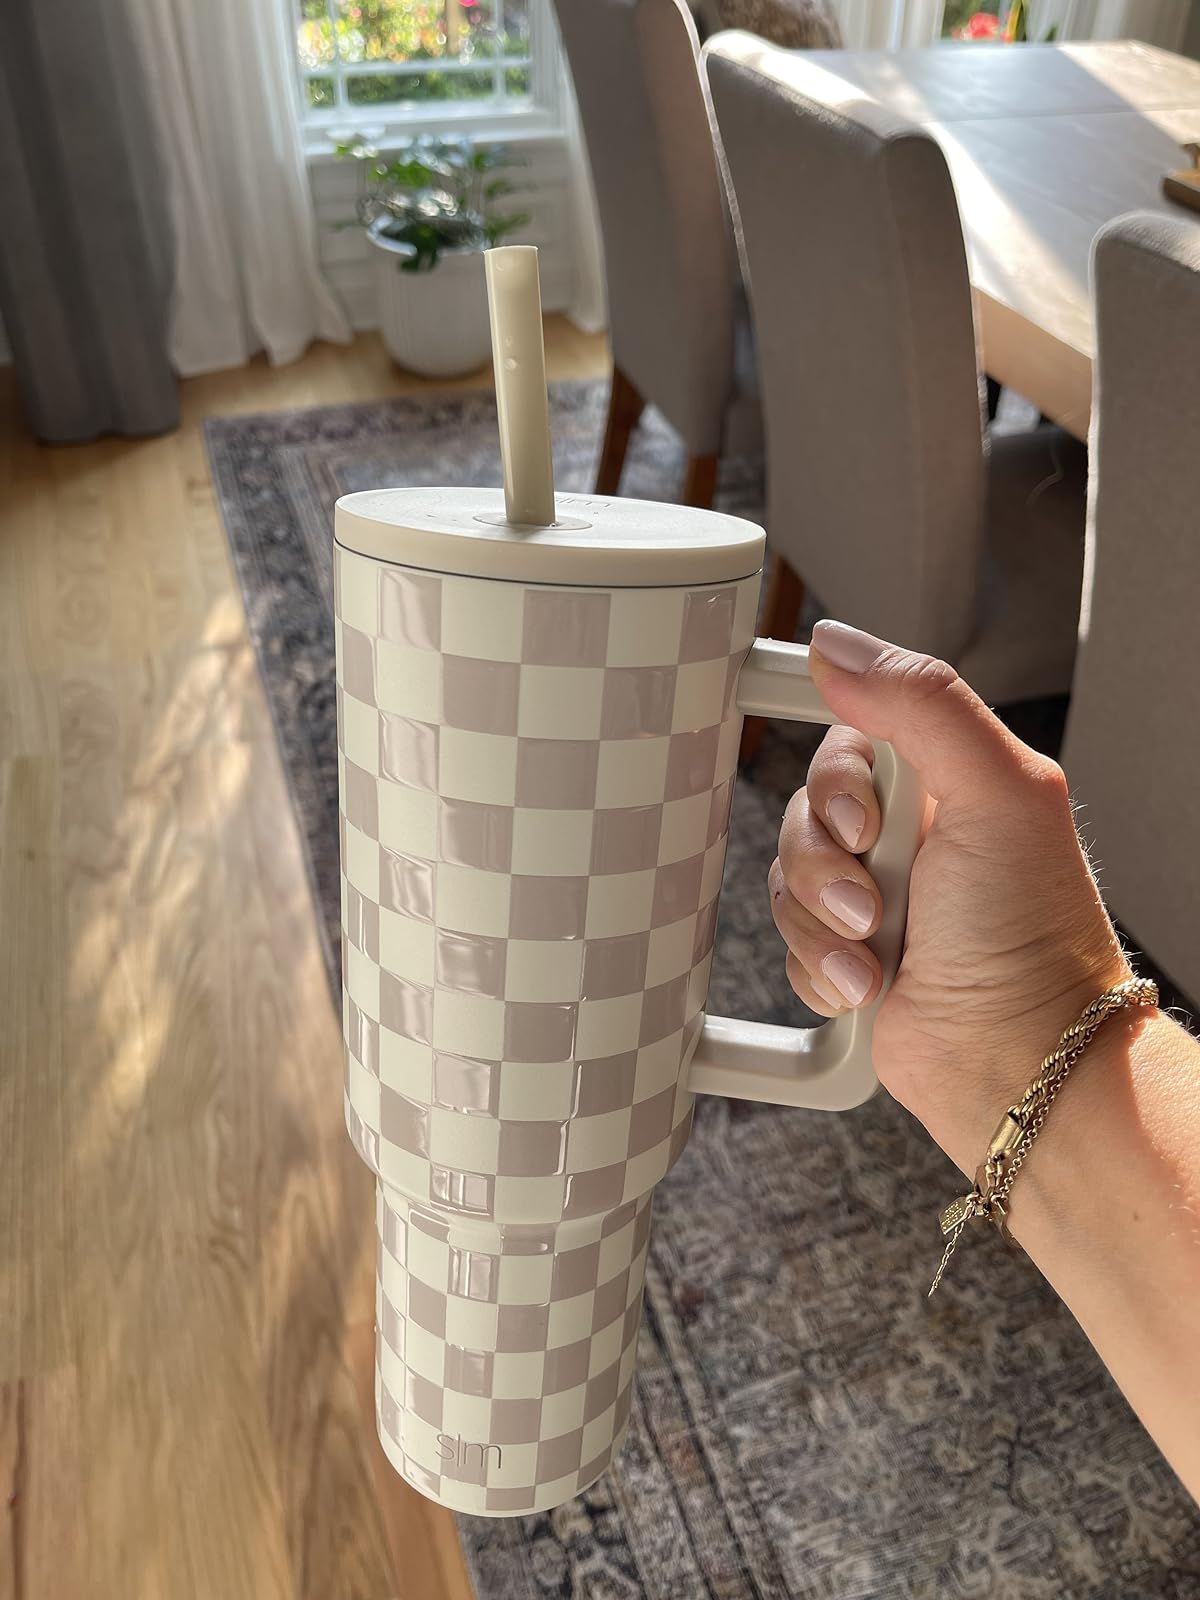 My new water cup! | Amazon (US)